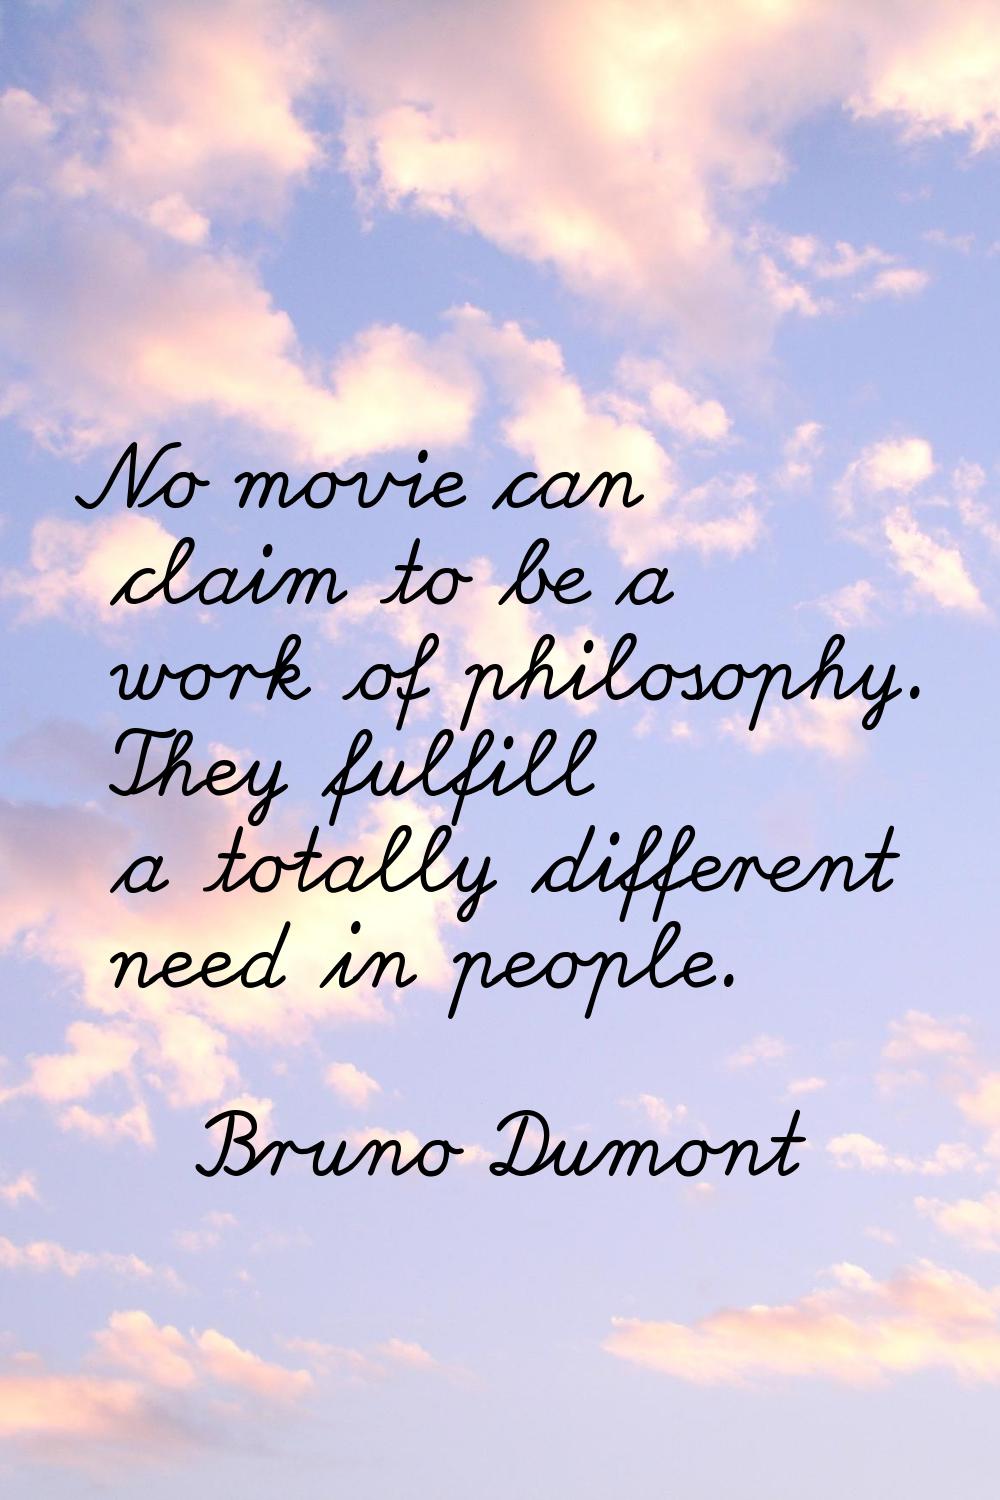 No movie can claim to be a work of philosophy. They fulfill a totally different need in people.